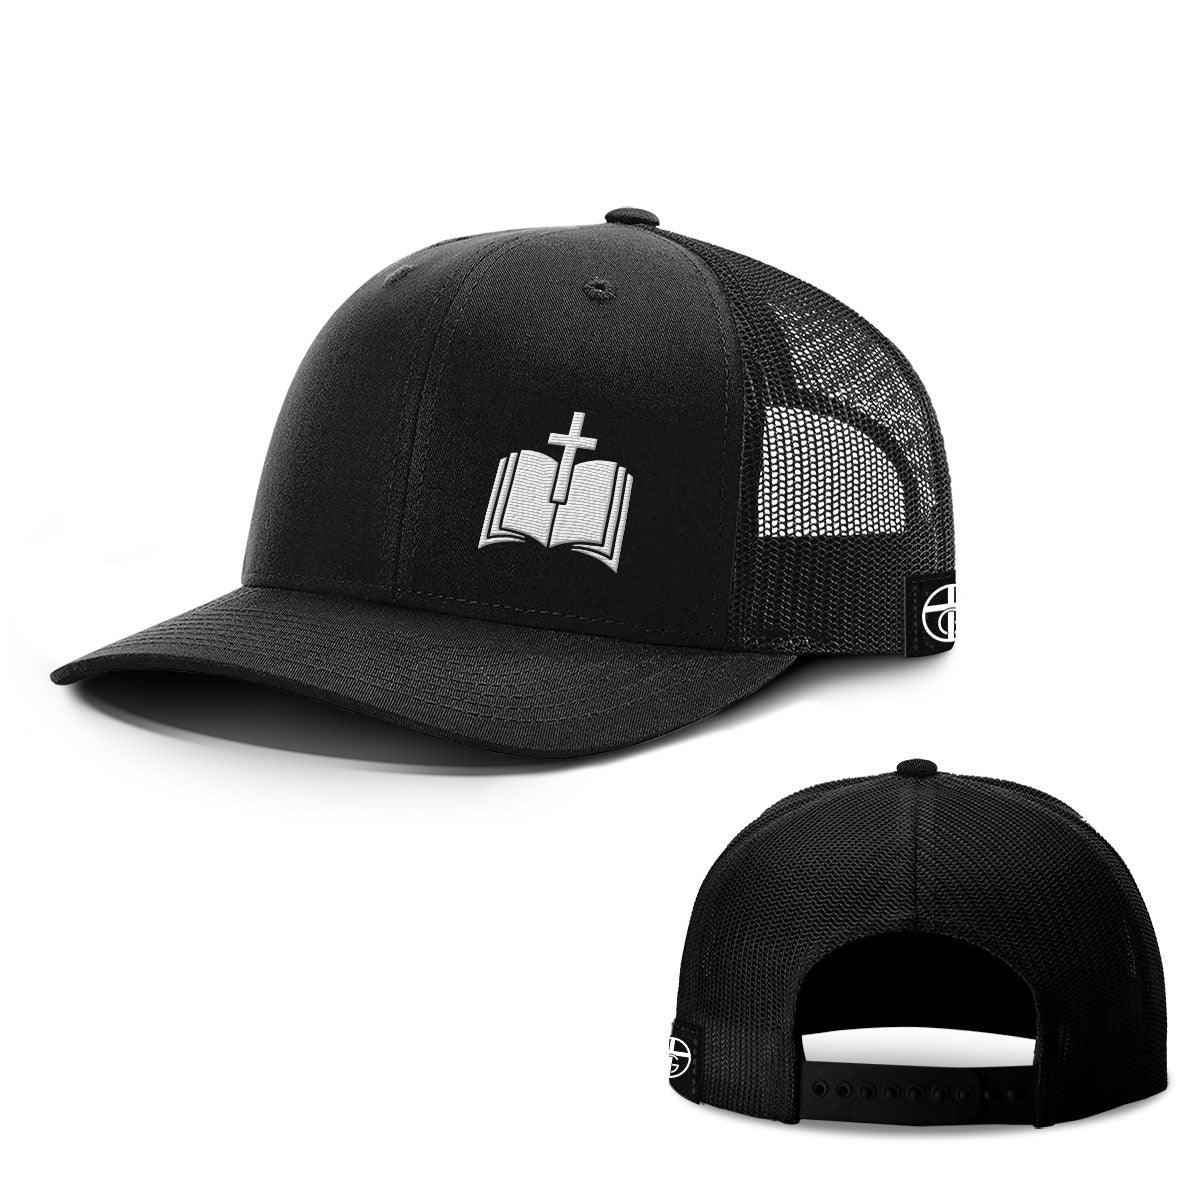 Word Of God Lower Left Hats - Our True God